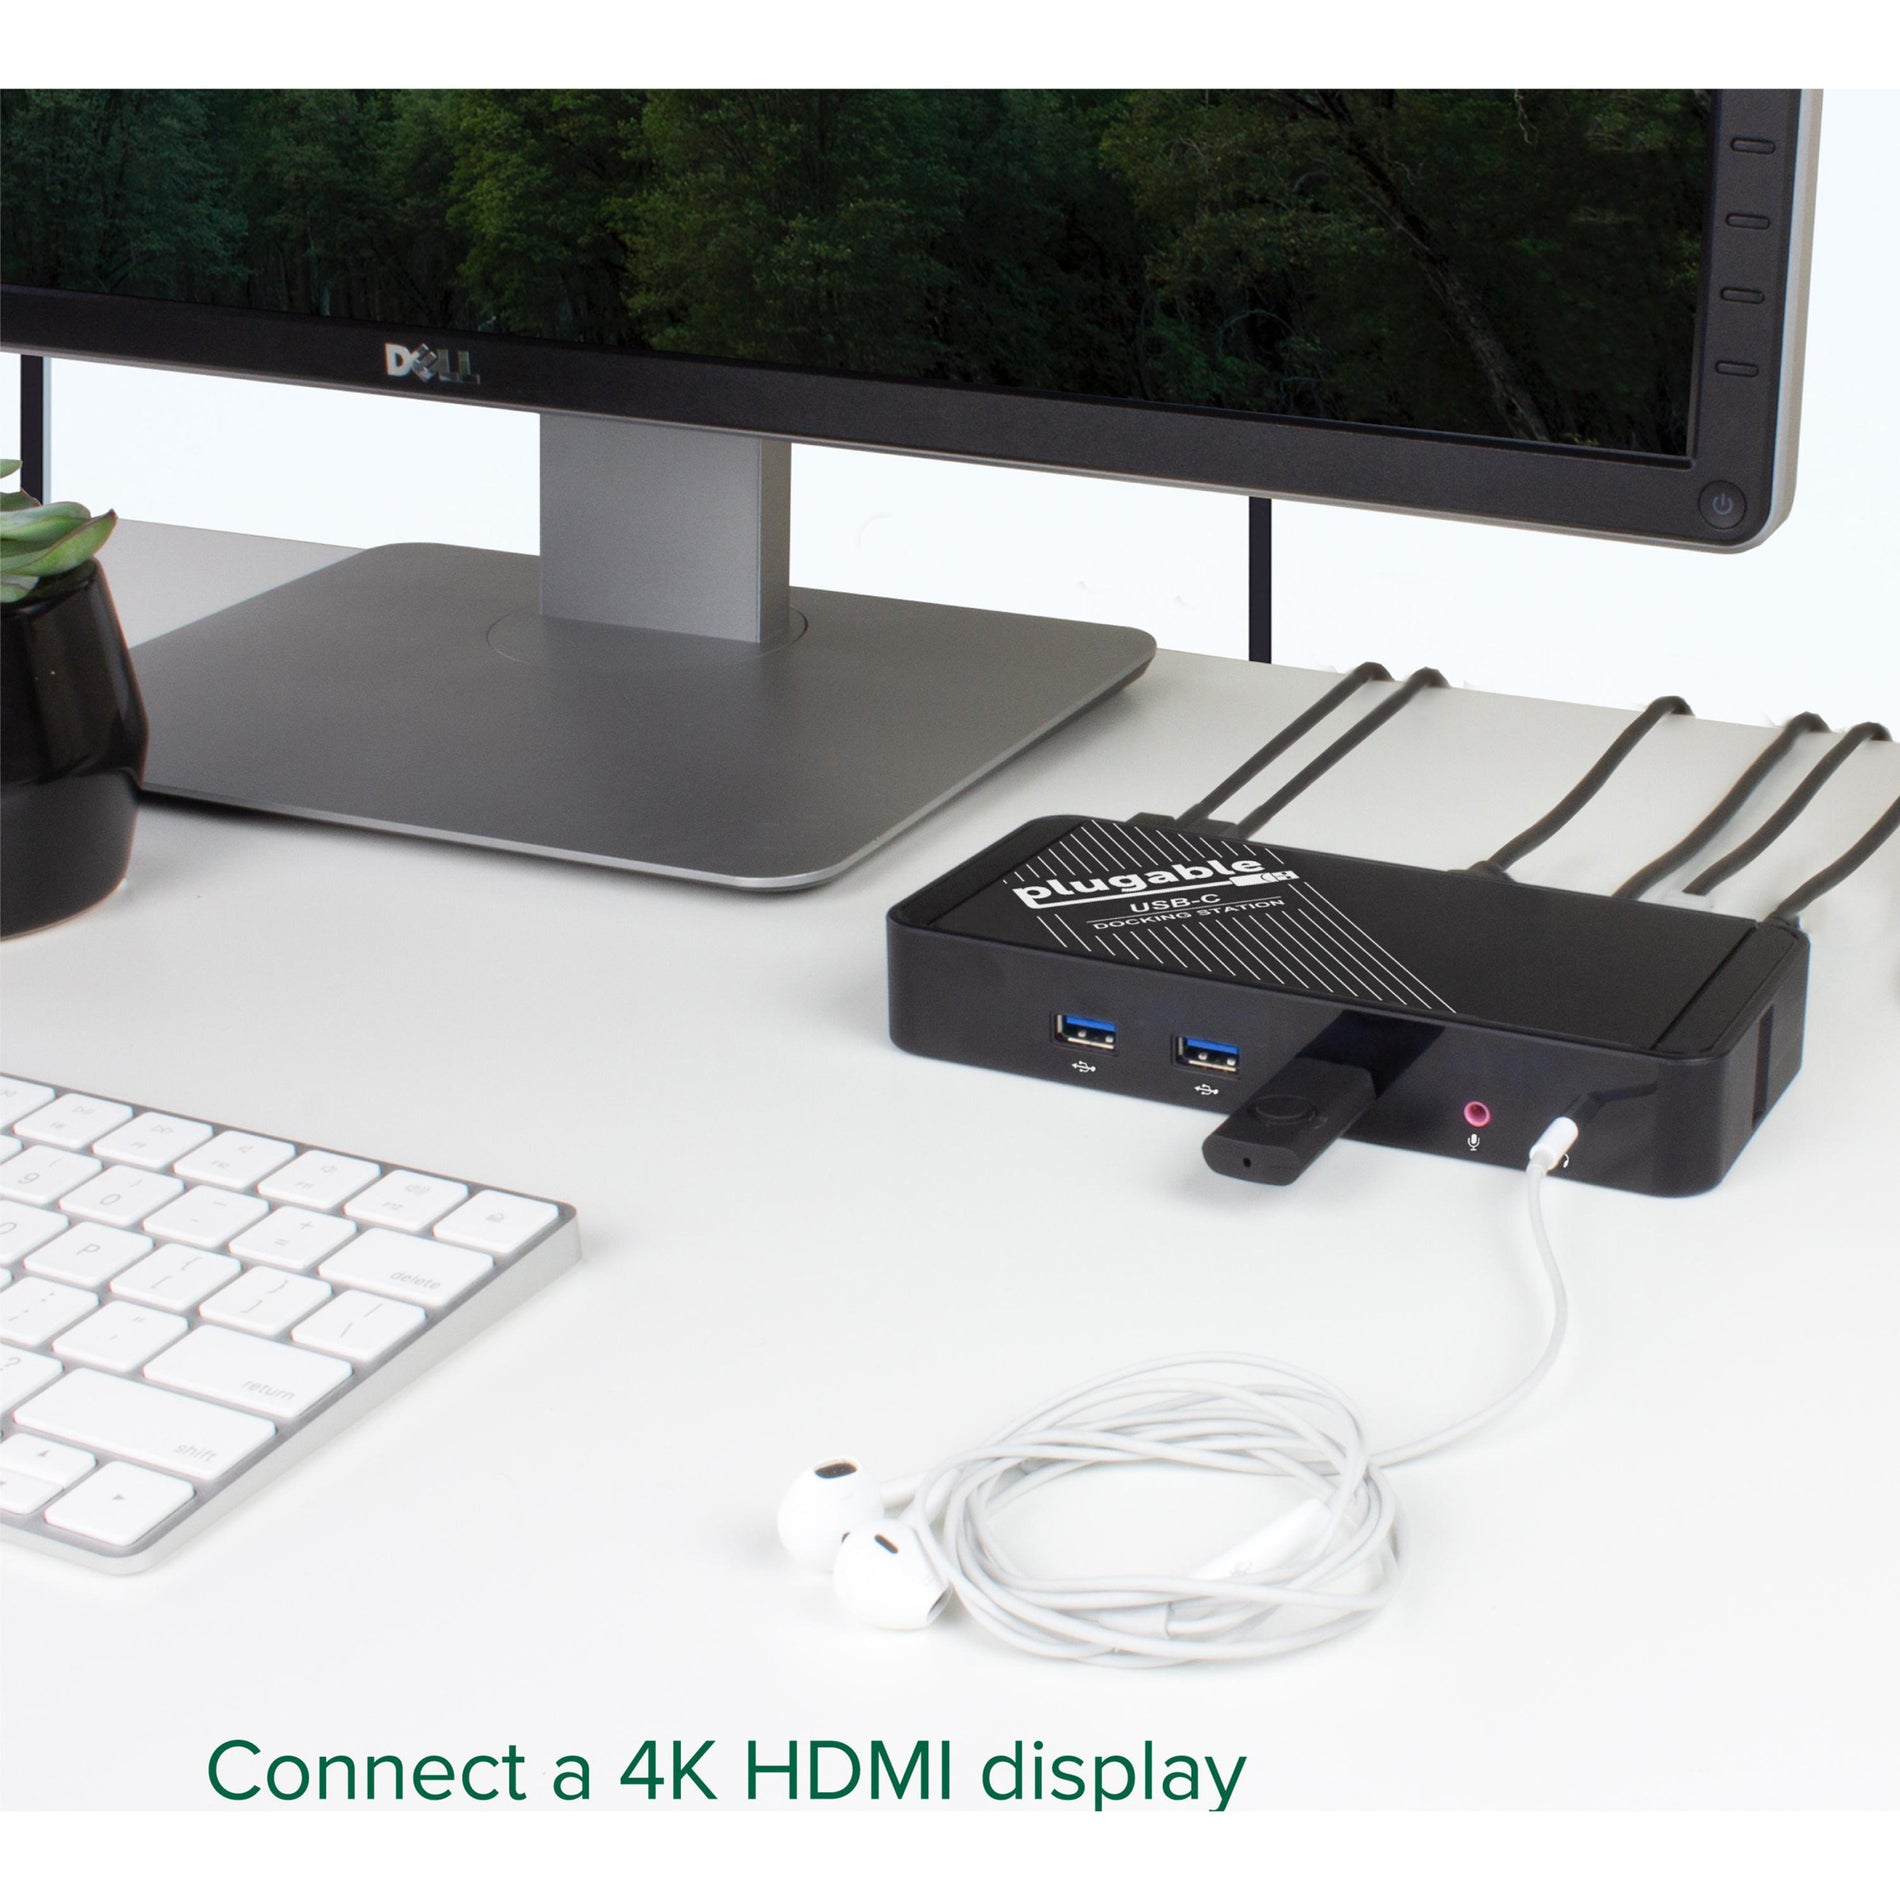 Plugable UD-CA1A USB-C Docking Station with Charging, Thunderbolt 3 and USB-C Compatibility, 2 Year Warranty